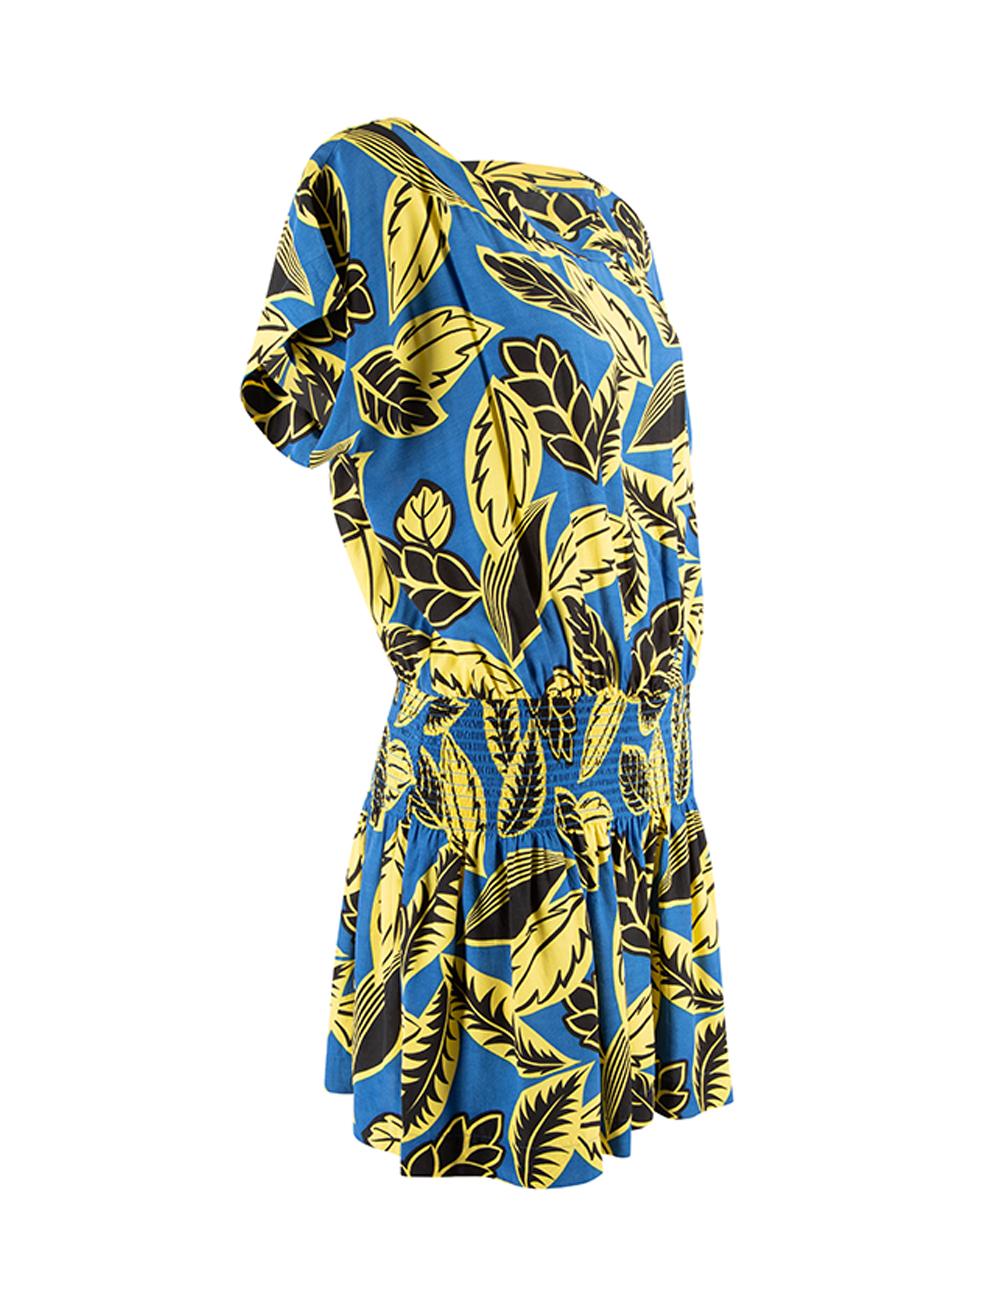 CONDITION is Very good. Hardly any visible wear to dress is evident on this used Moschino Boutique designer resale item.




Details


Blue and yellow

Synthetic

Mini dress

Tropical print pattern

Round neckline

Elasticated waist





Made in